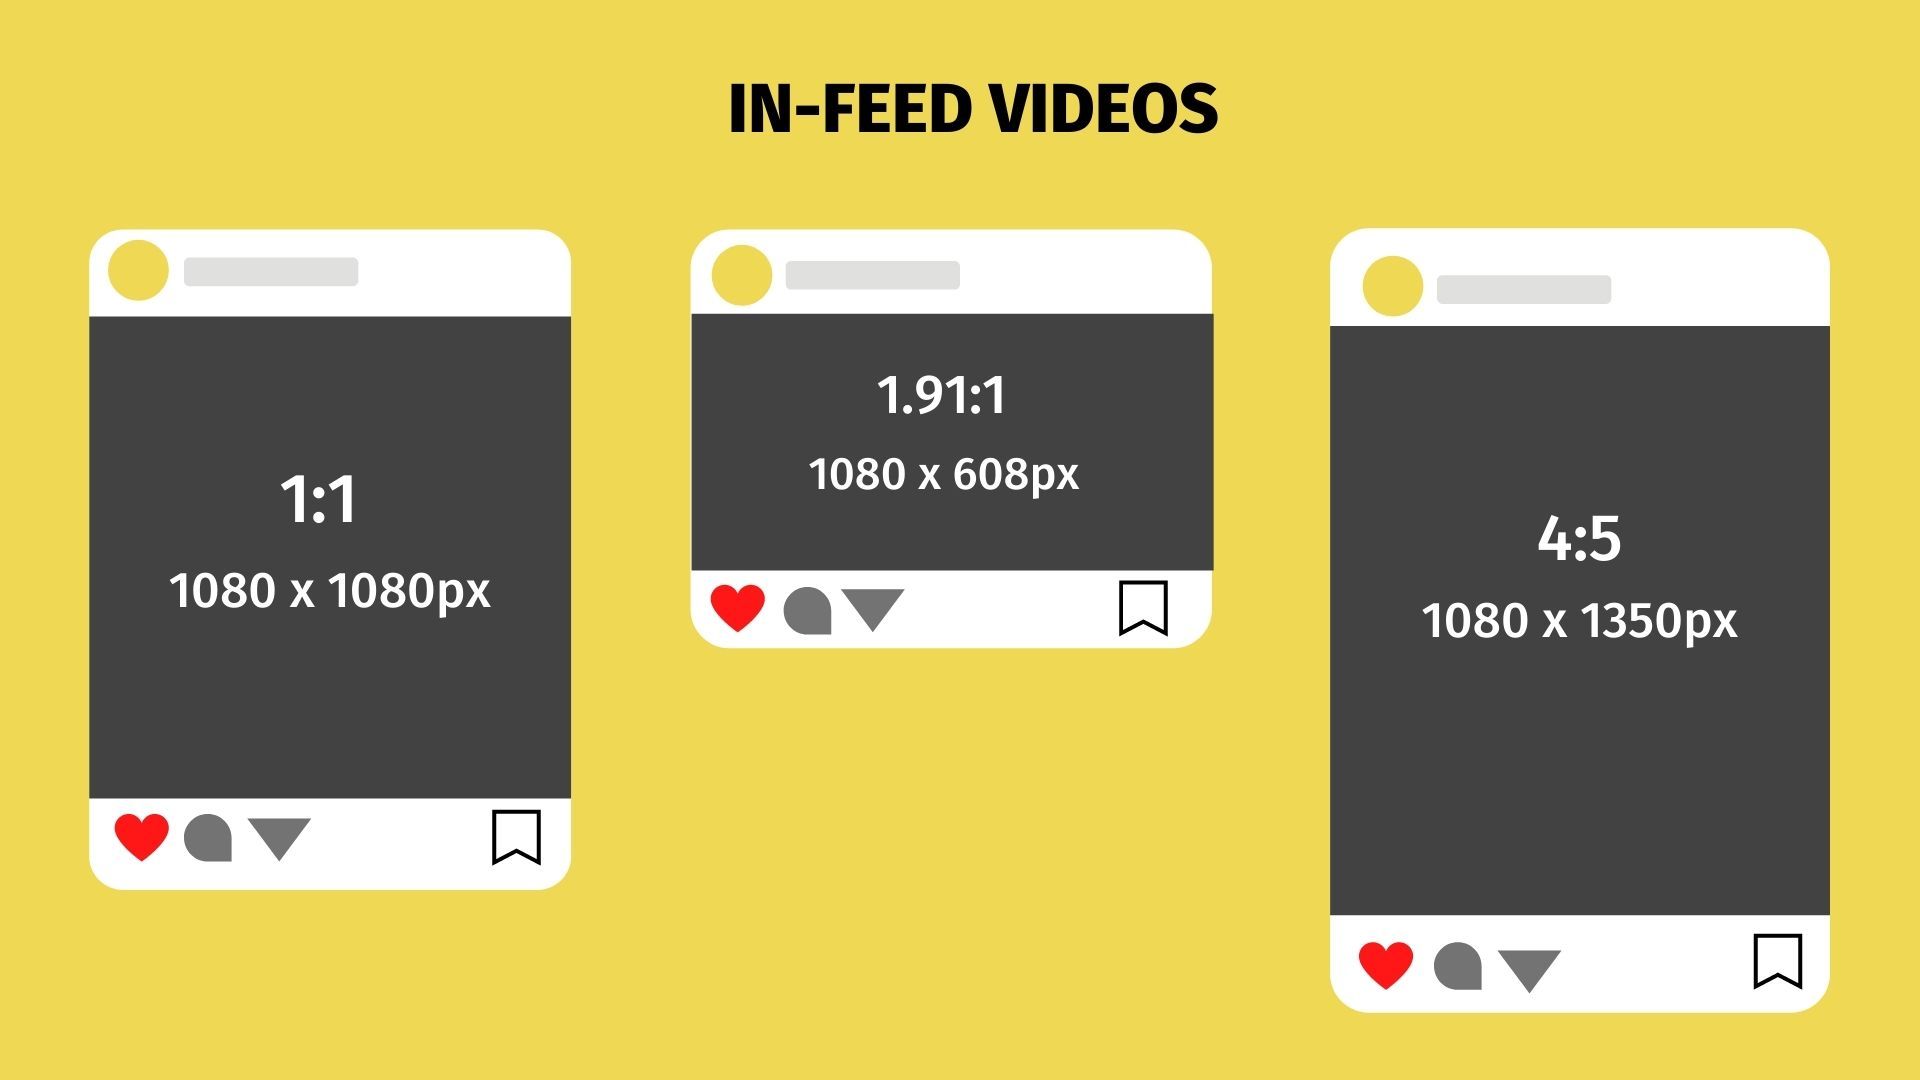 Best Instagram Video Format - Aspect ratios for In-feed videos